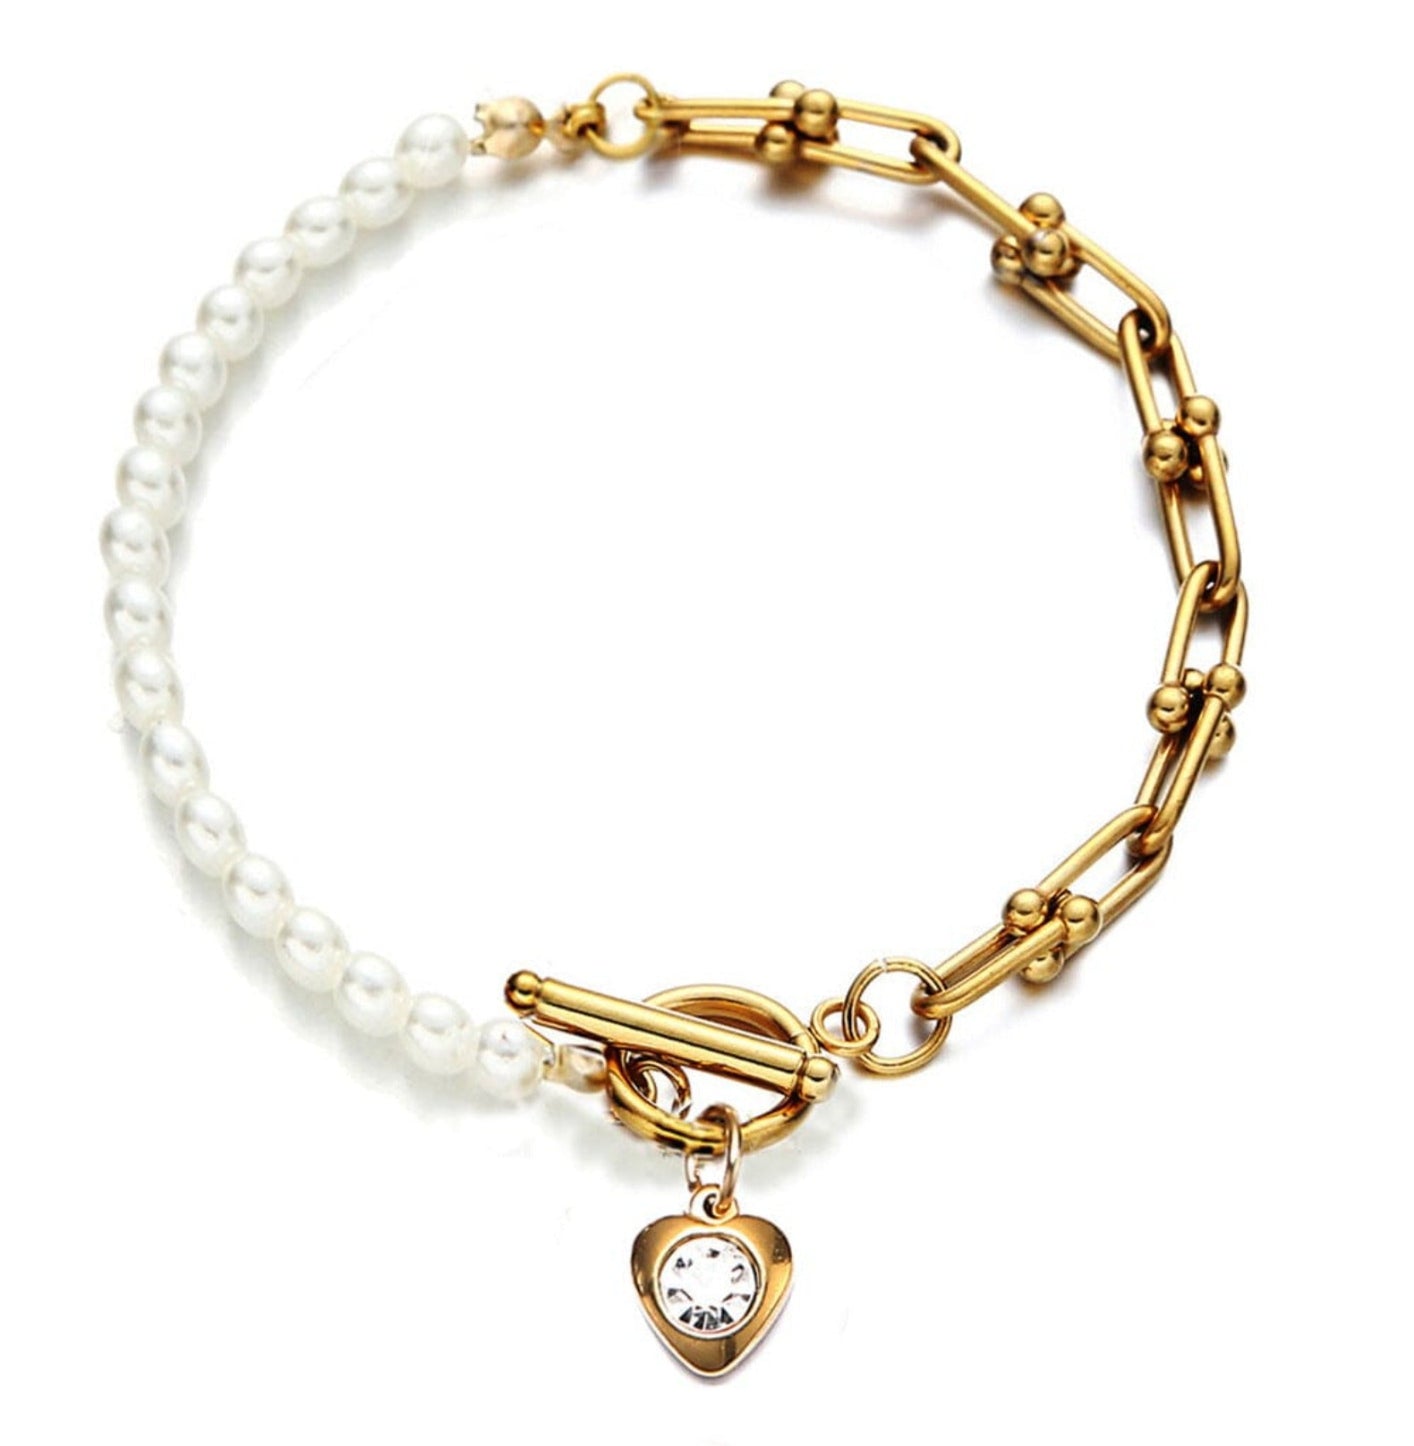 Simple Stainless Steel U-shaped Chain Pearl Stitching Bracelet braclet Yubama Jewelry Online Store - The Elegant Designs of Gold and Silver ! ALAD364 Gold 